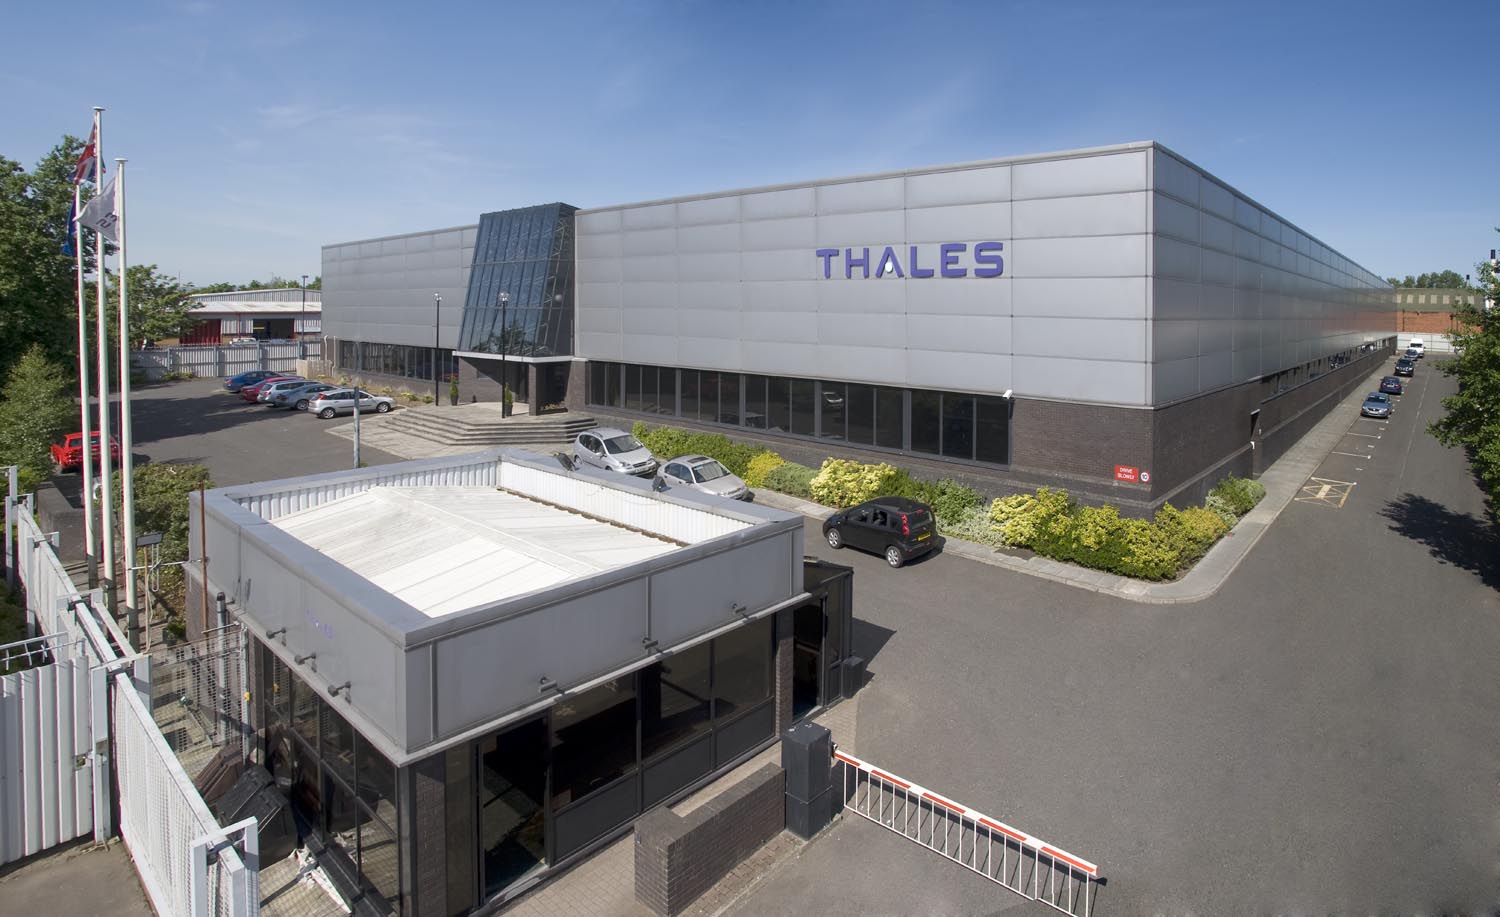 The Thales factory site in Belfast